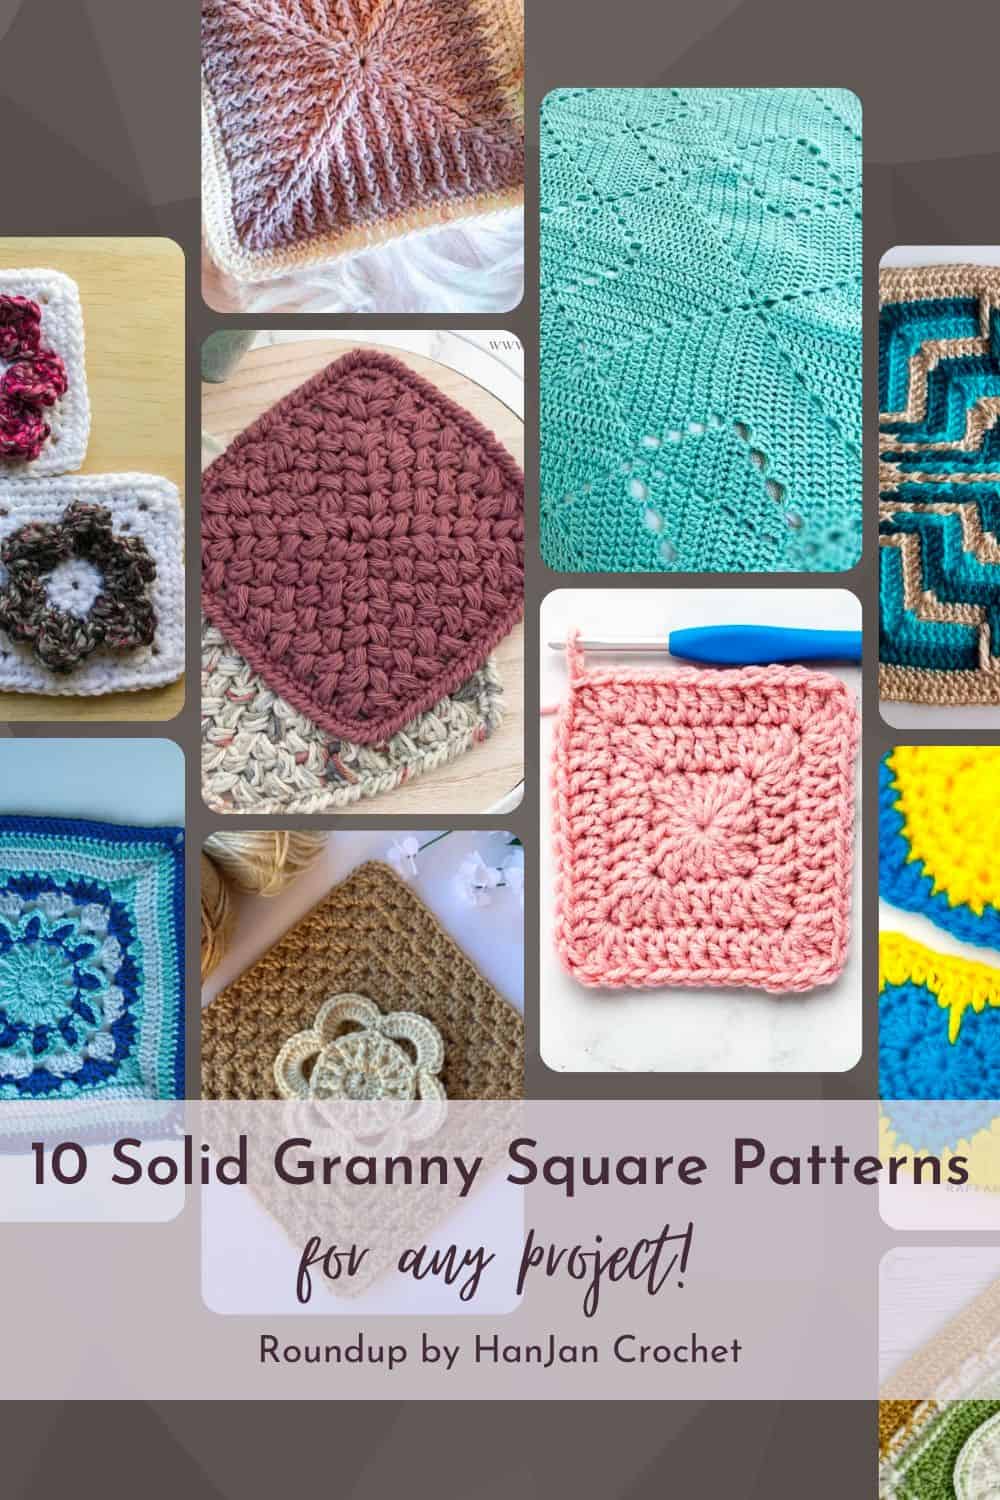 10 Solid Granny Square Patterns